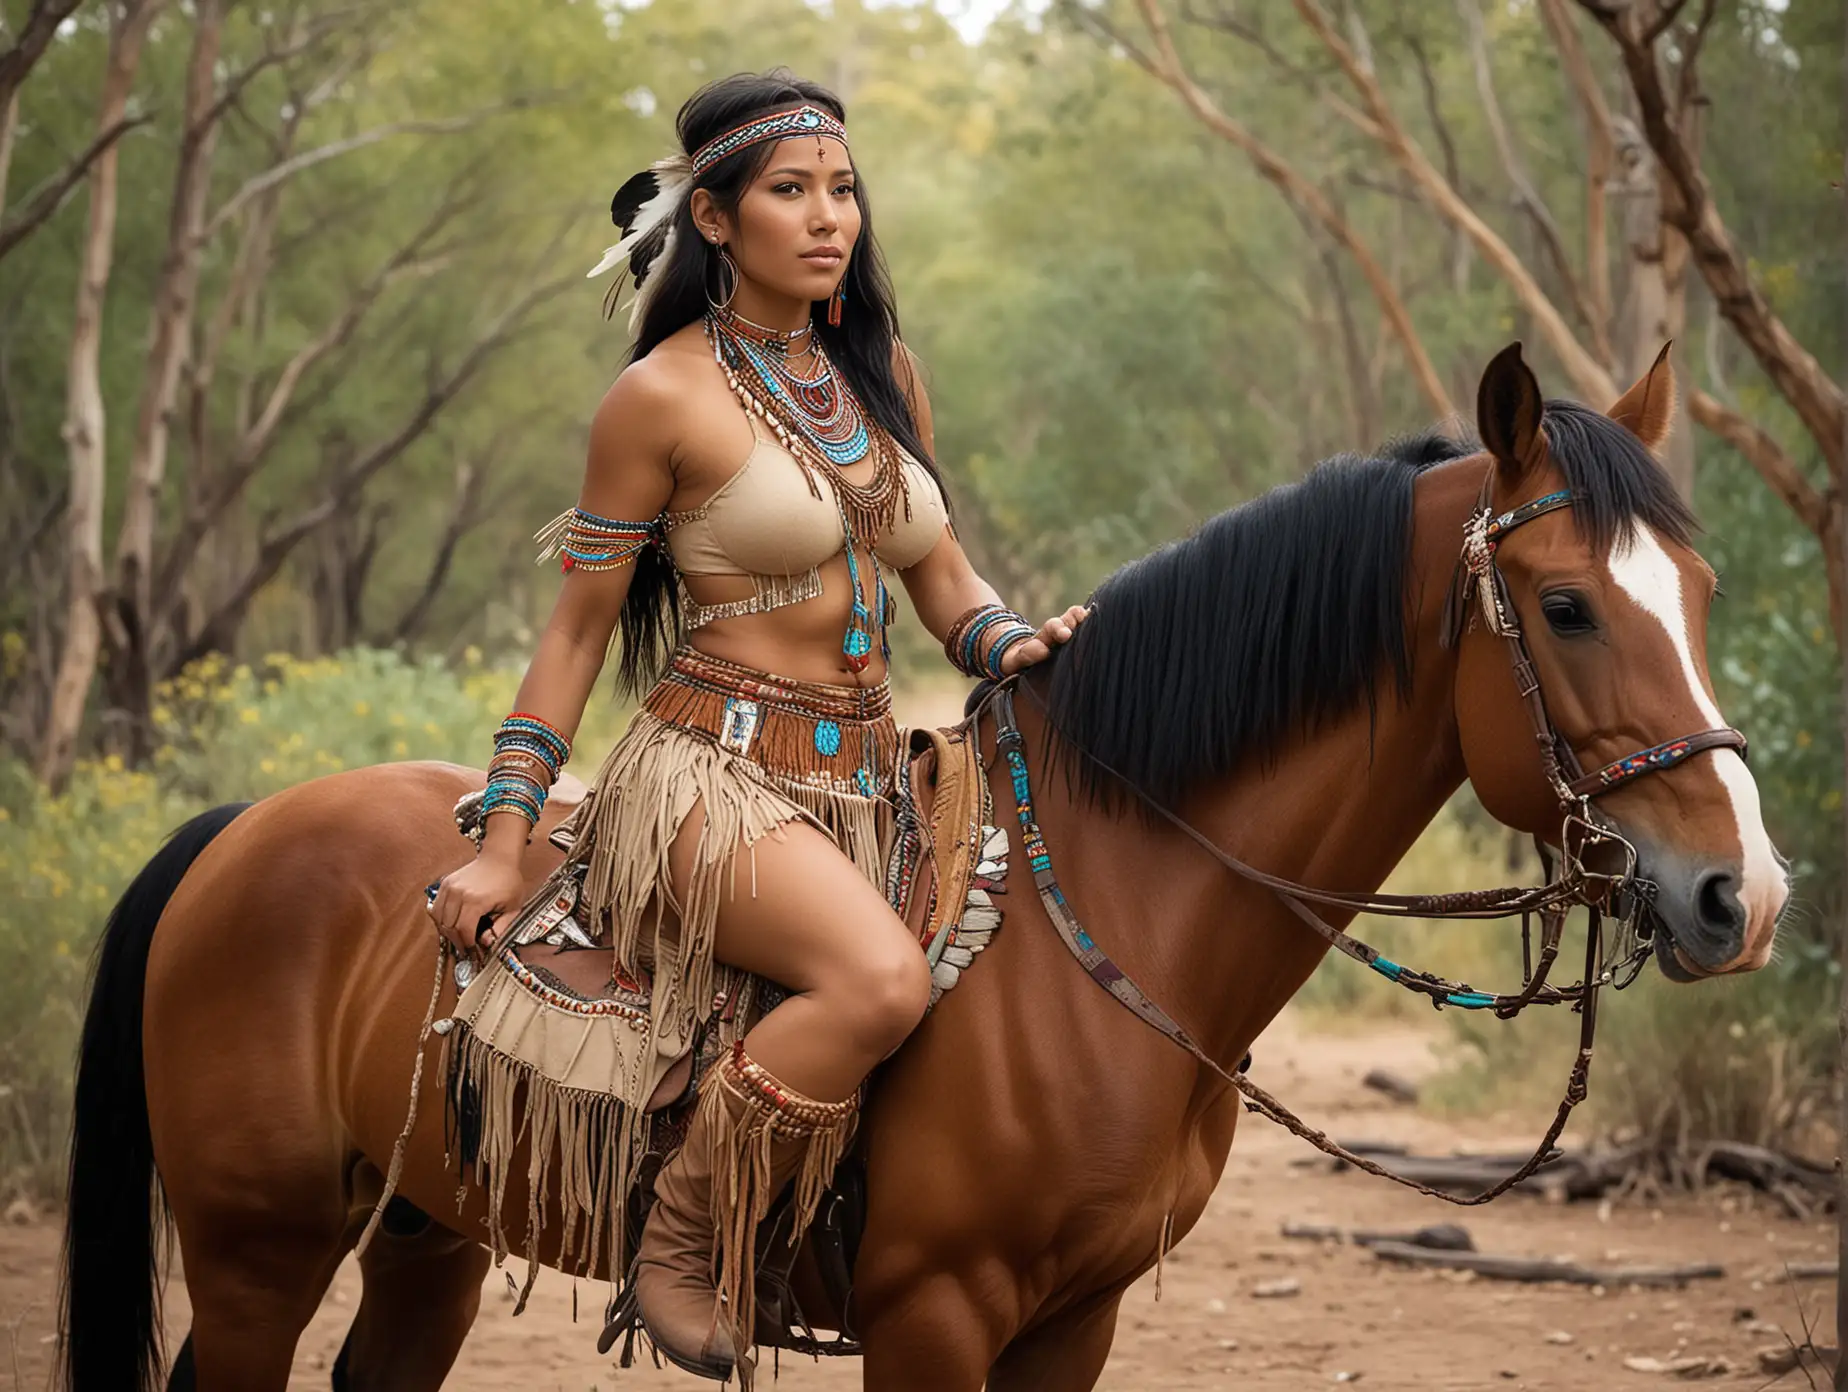 something sexy and rafined, likwa native american on a horse and dressed nicely showing her appeal in a magical native american environment